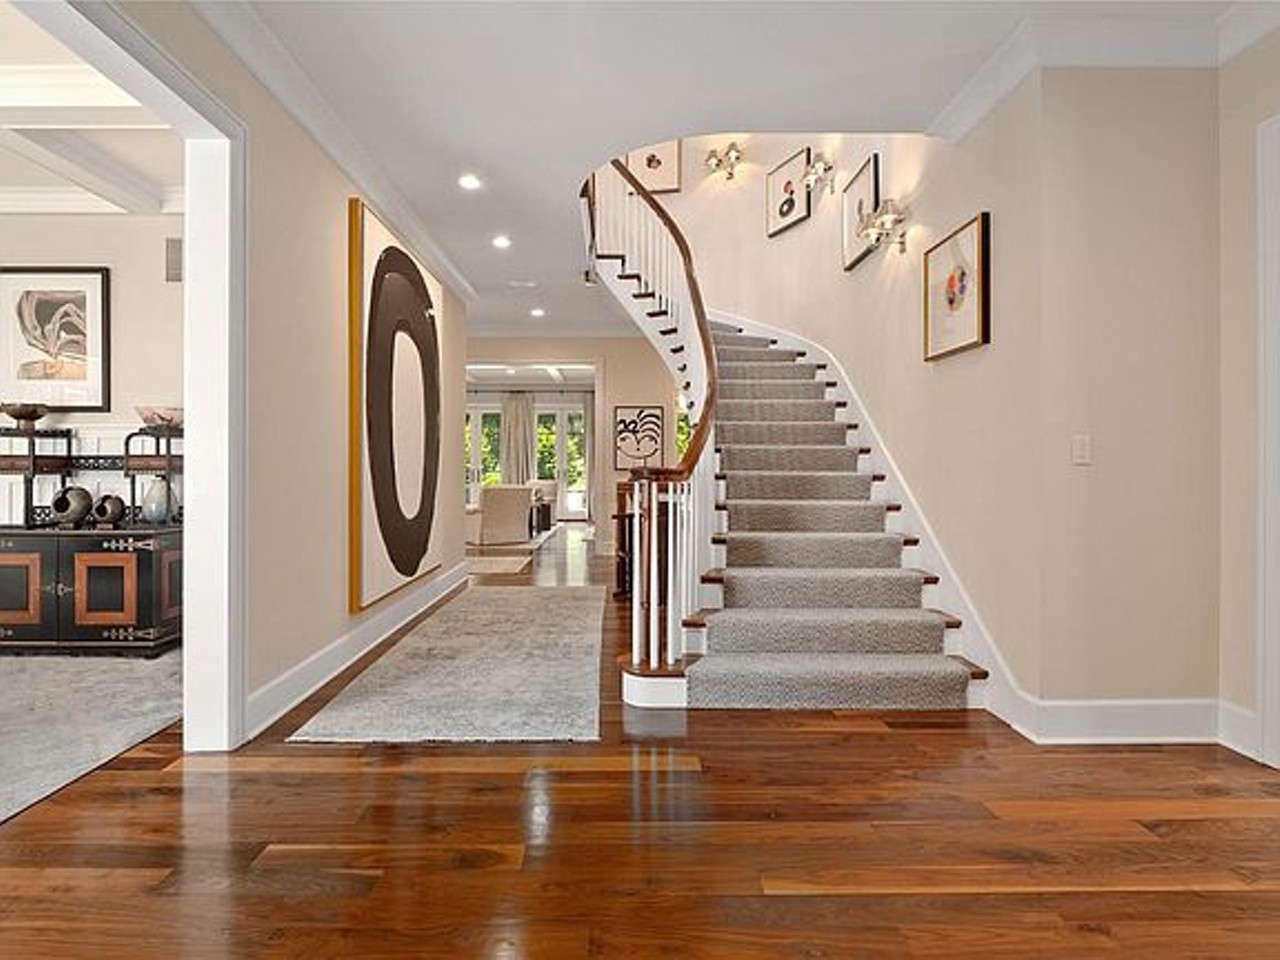 There's a Secret Room Hidden in the Basement of this Ladue House [PHOTOS]